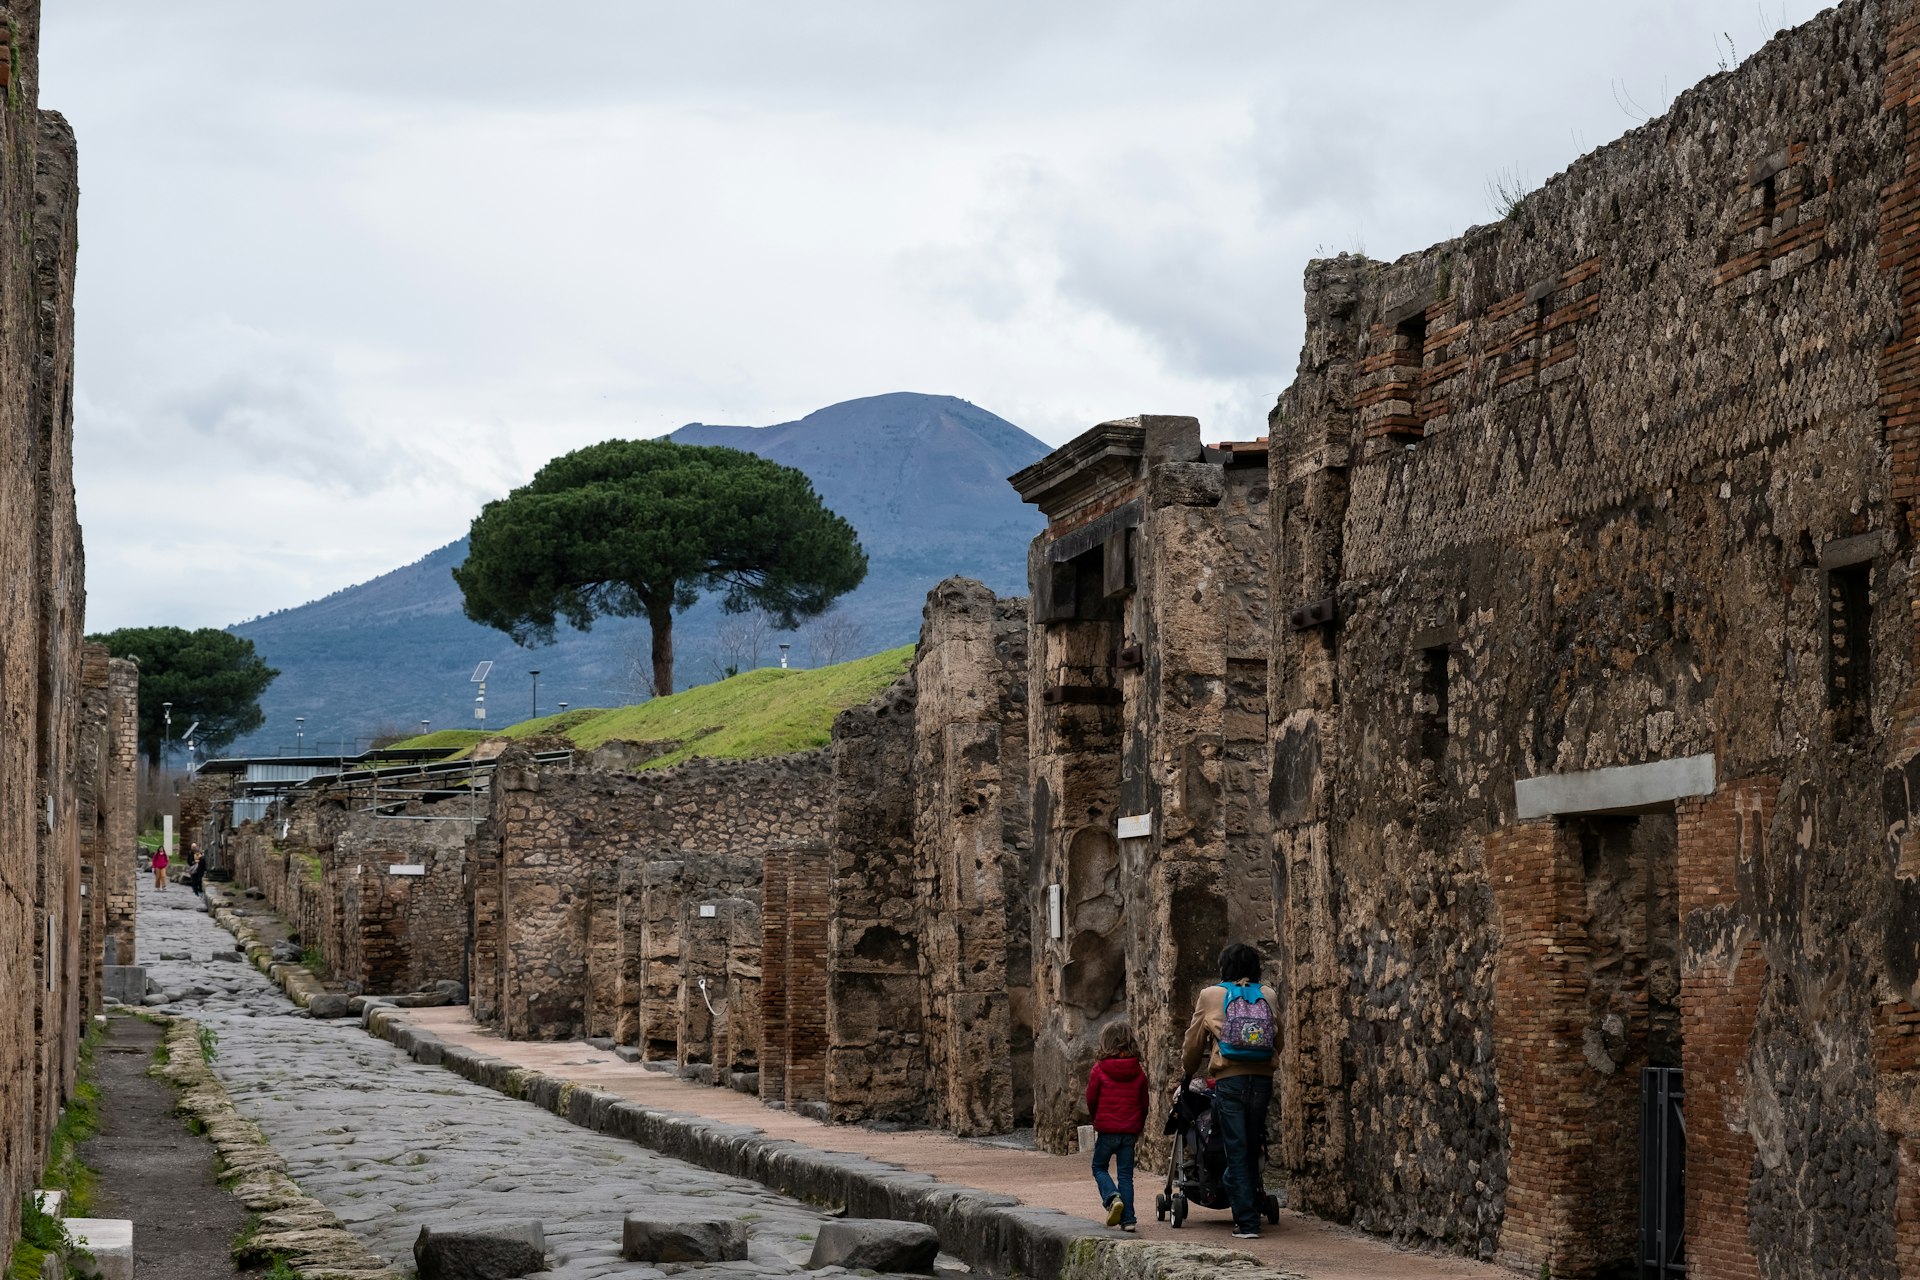 A view of a street in the Archaeological Park of Pompeii